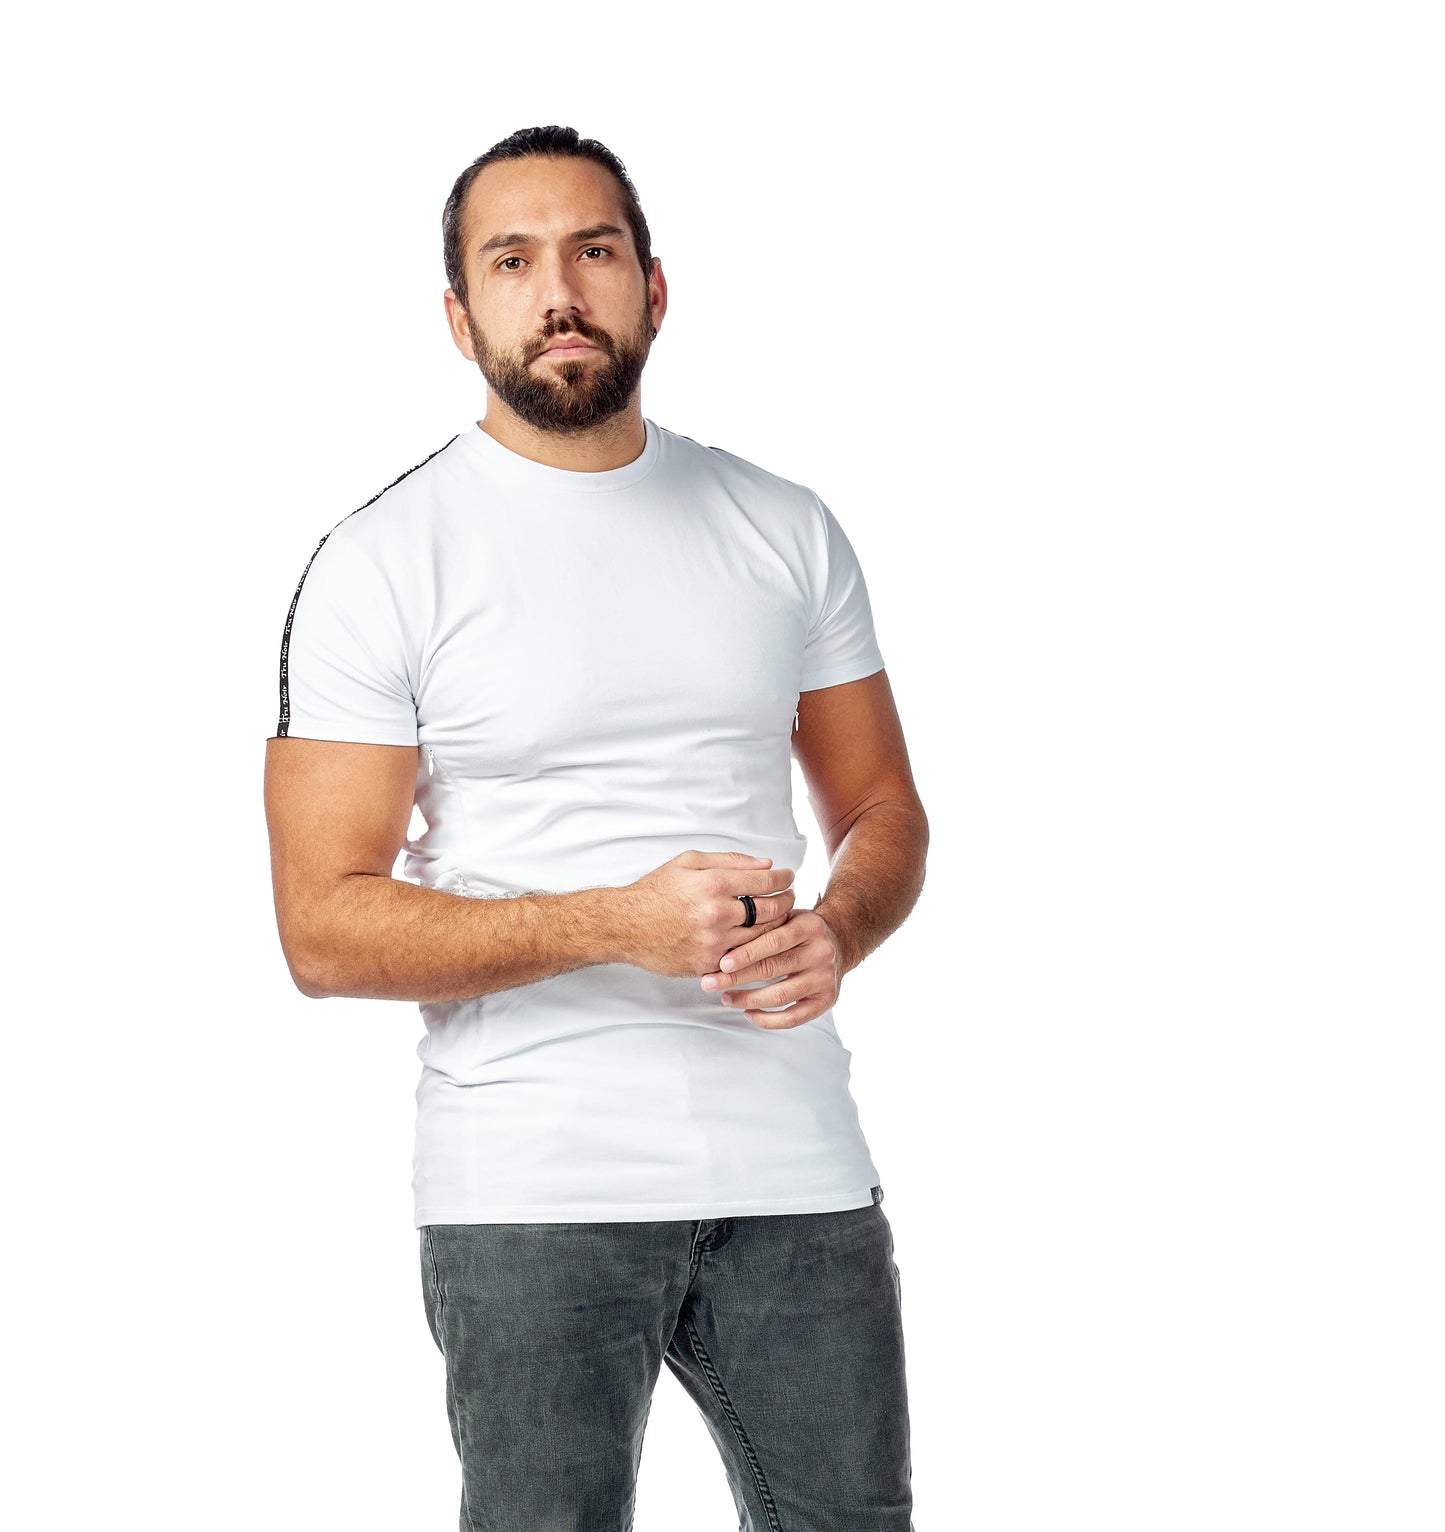 White mens tee shirt with side pockets